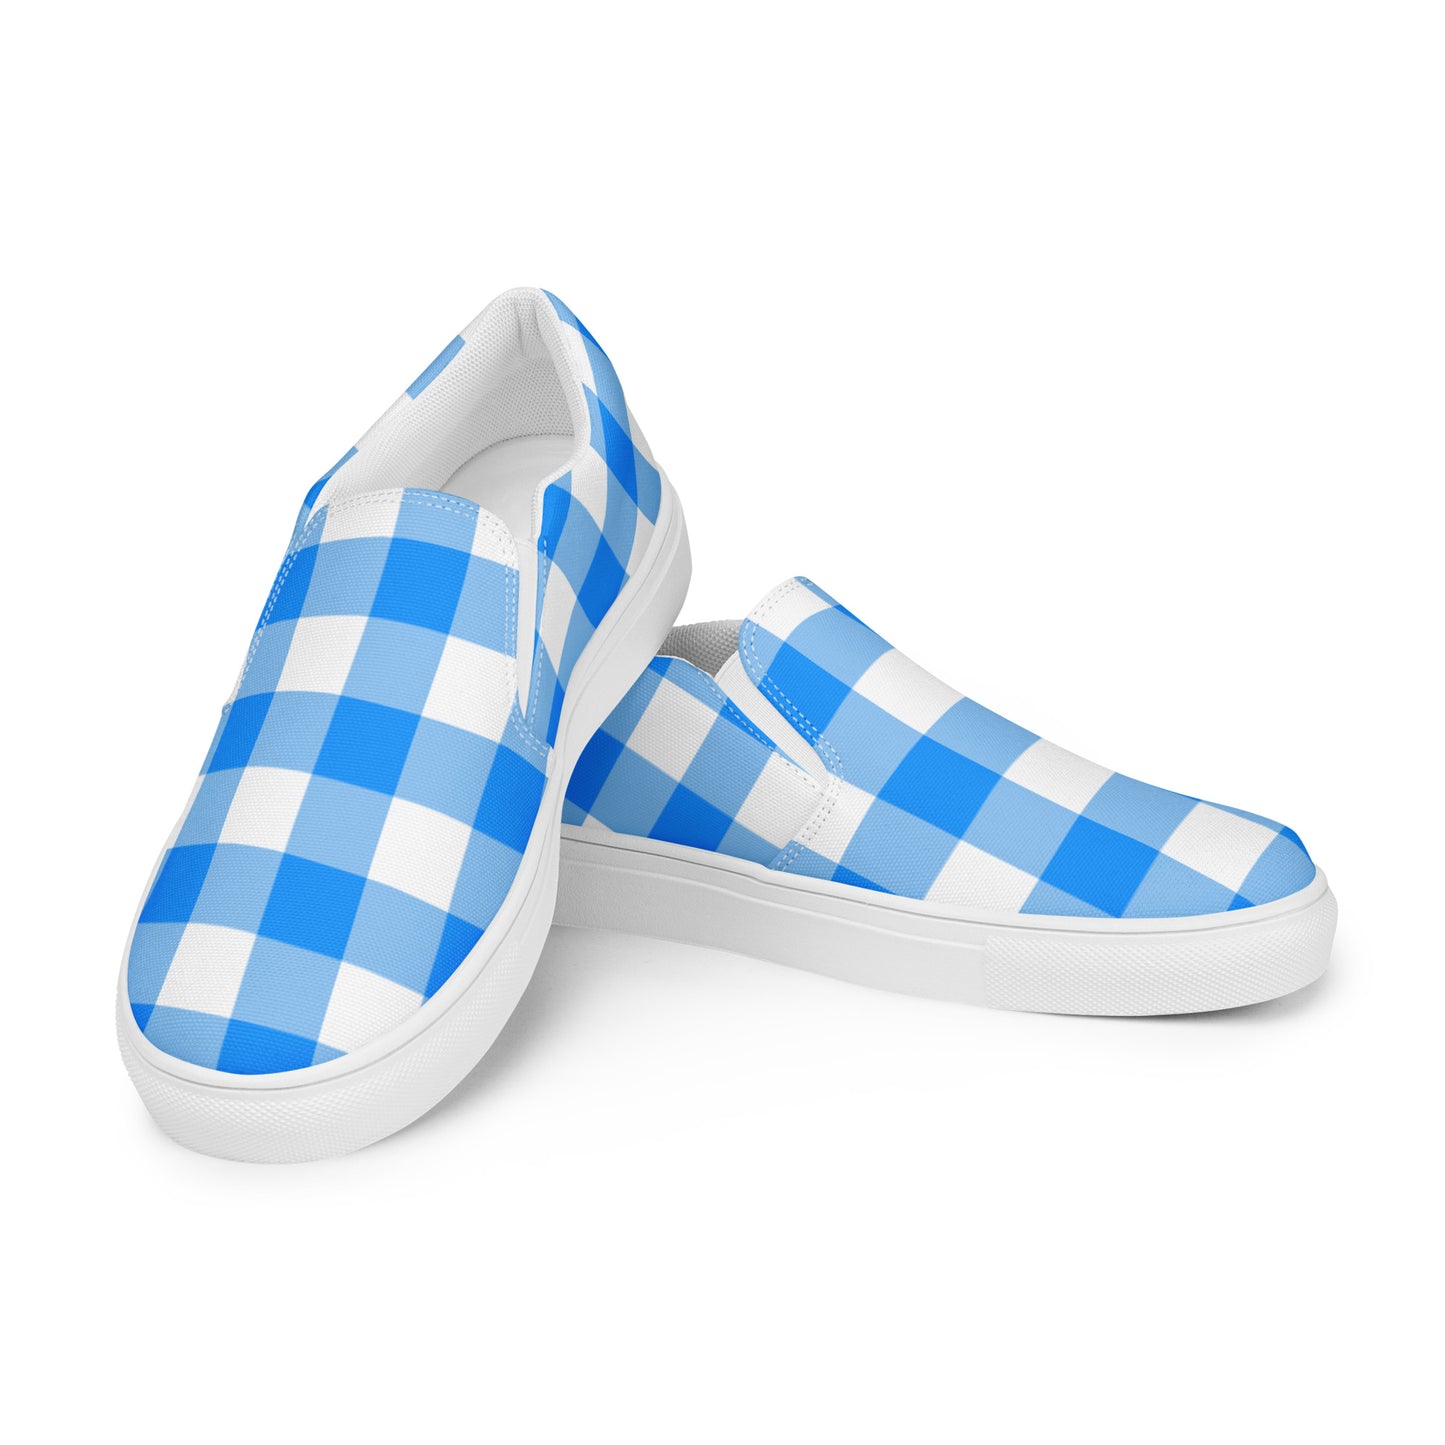 Beyond Blue Gingham Women’s Canvas Slip-On Flat Deck Shoe| Pinup Couture Relaxed